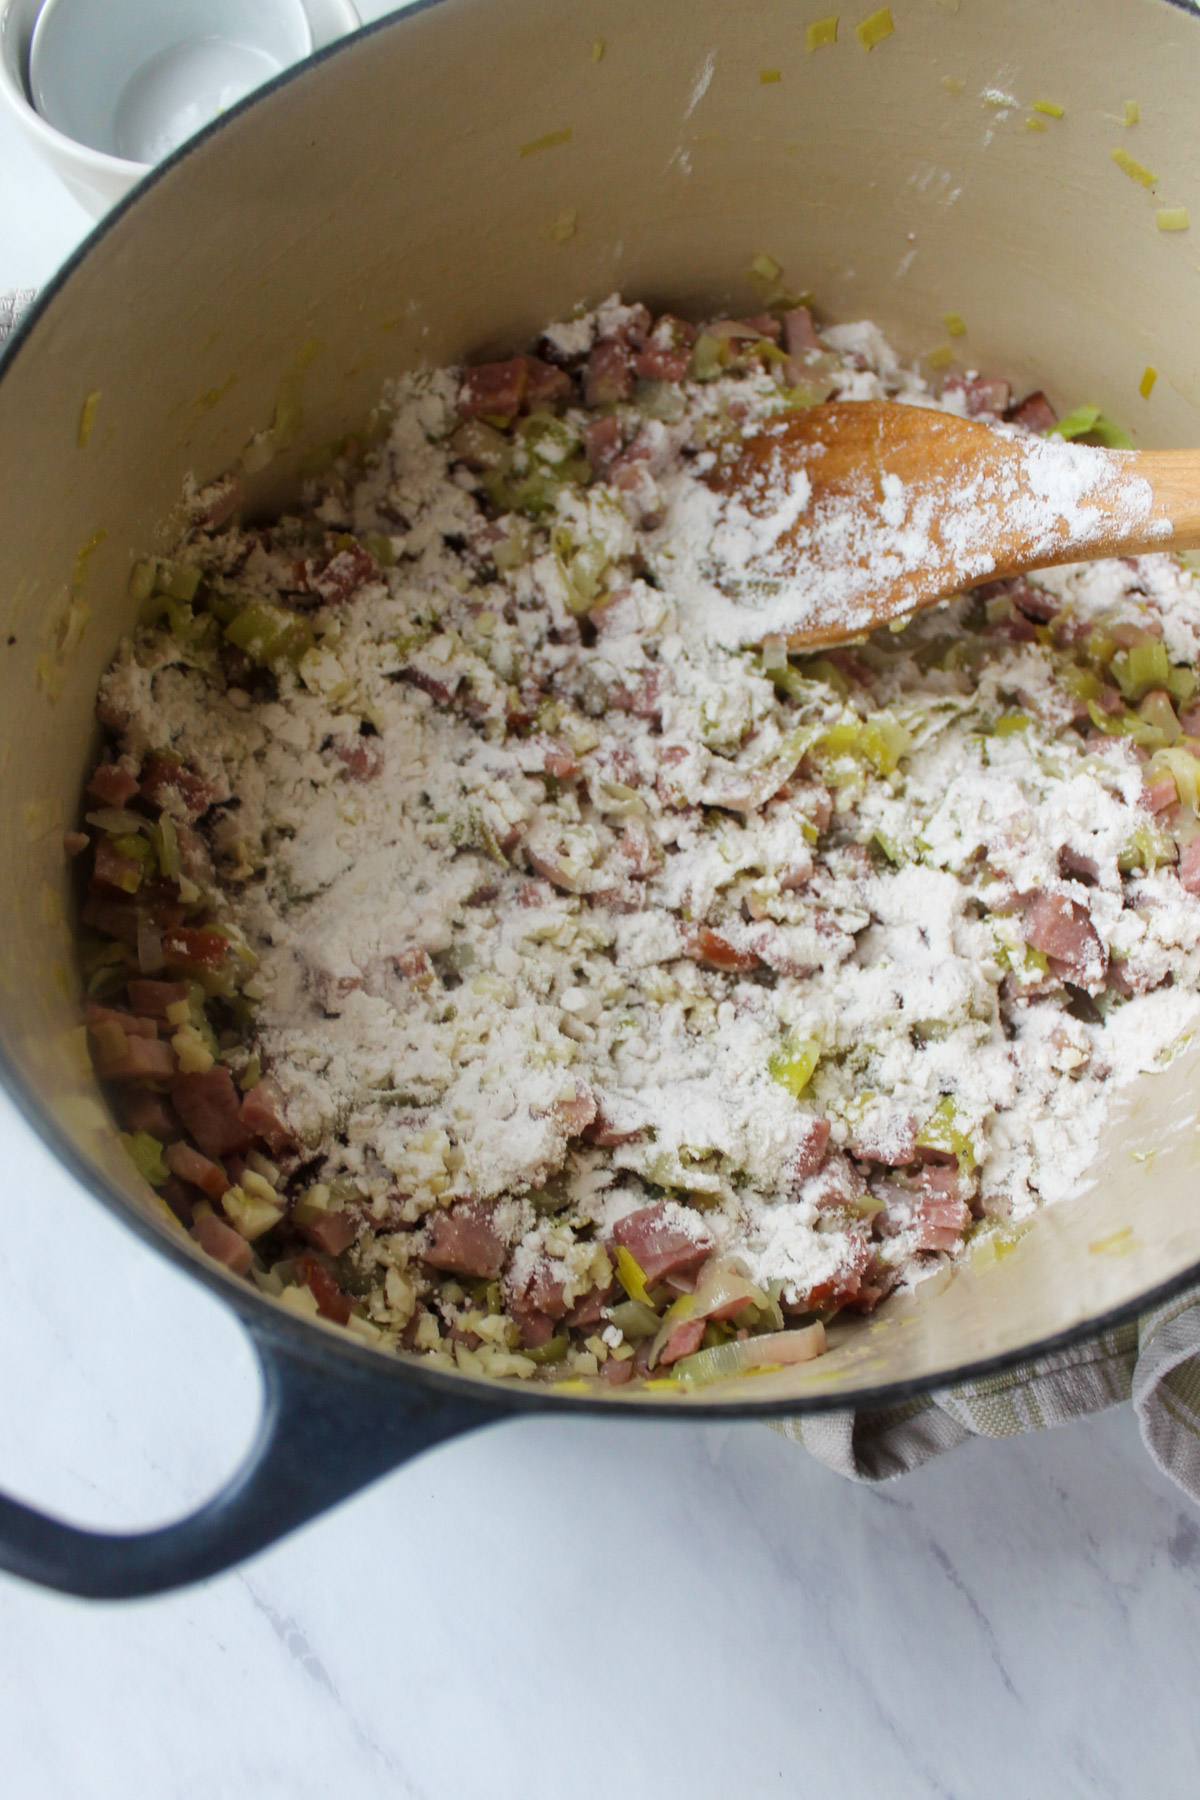 Adding flour to the cooked leeks and ham to make a roux to thicken the soup.